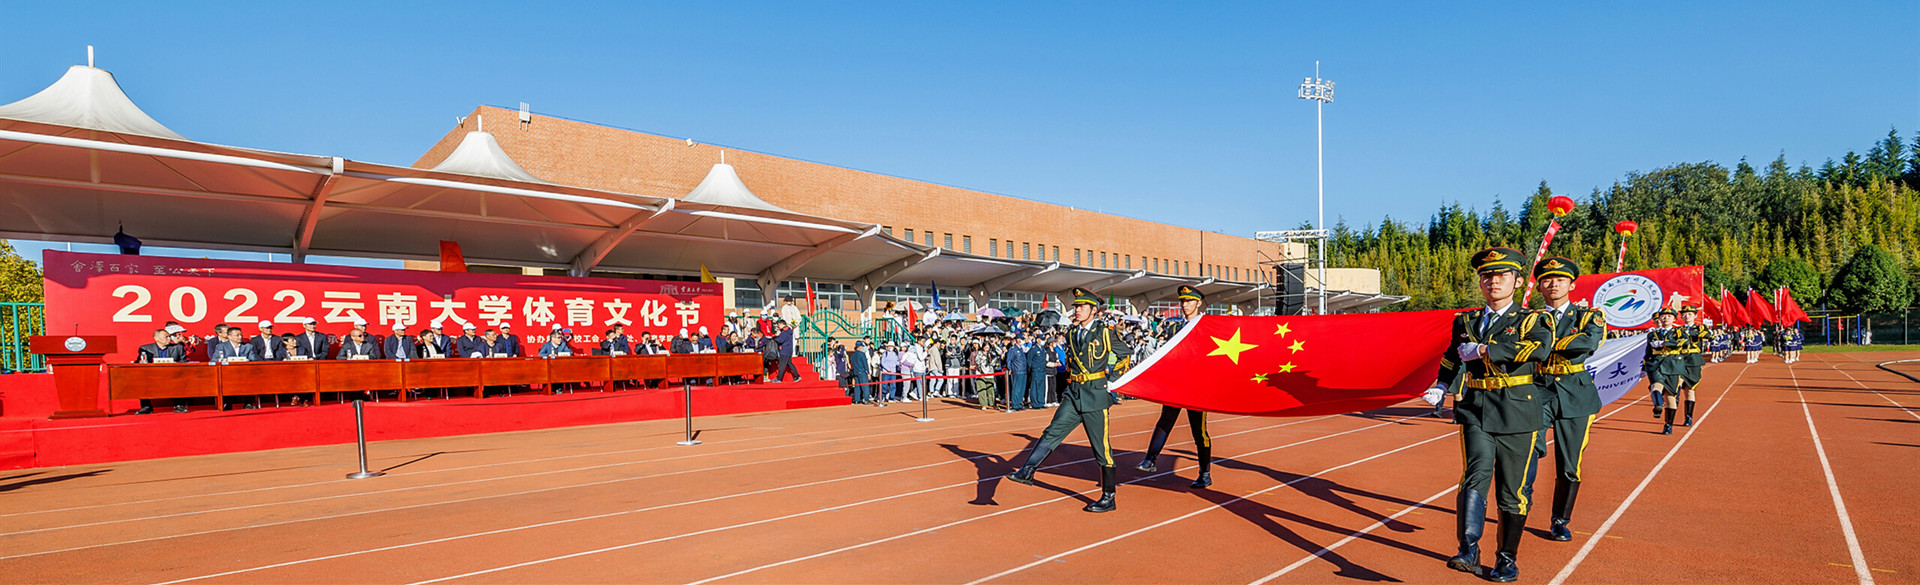 Yunnan University holds sports, culture festival